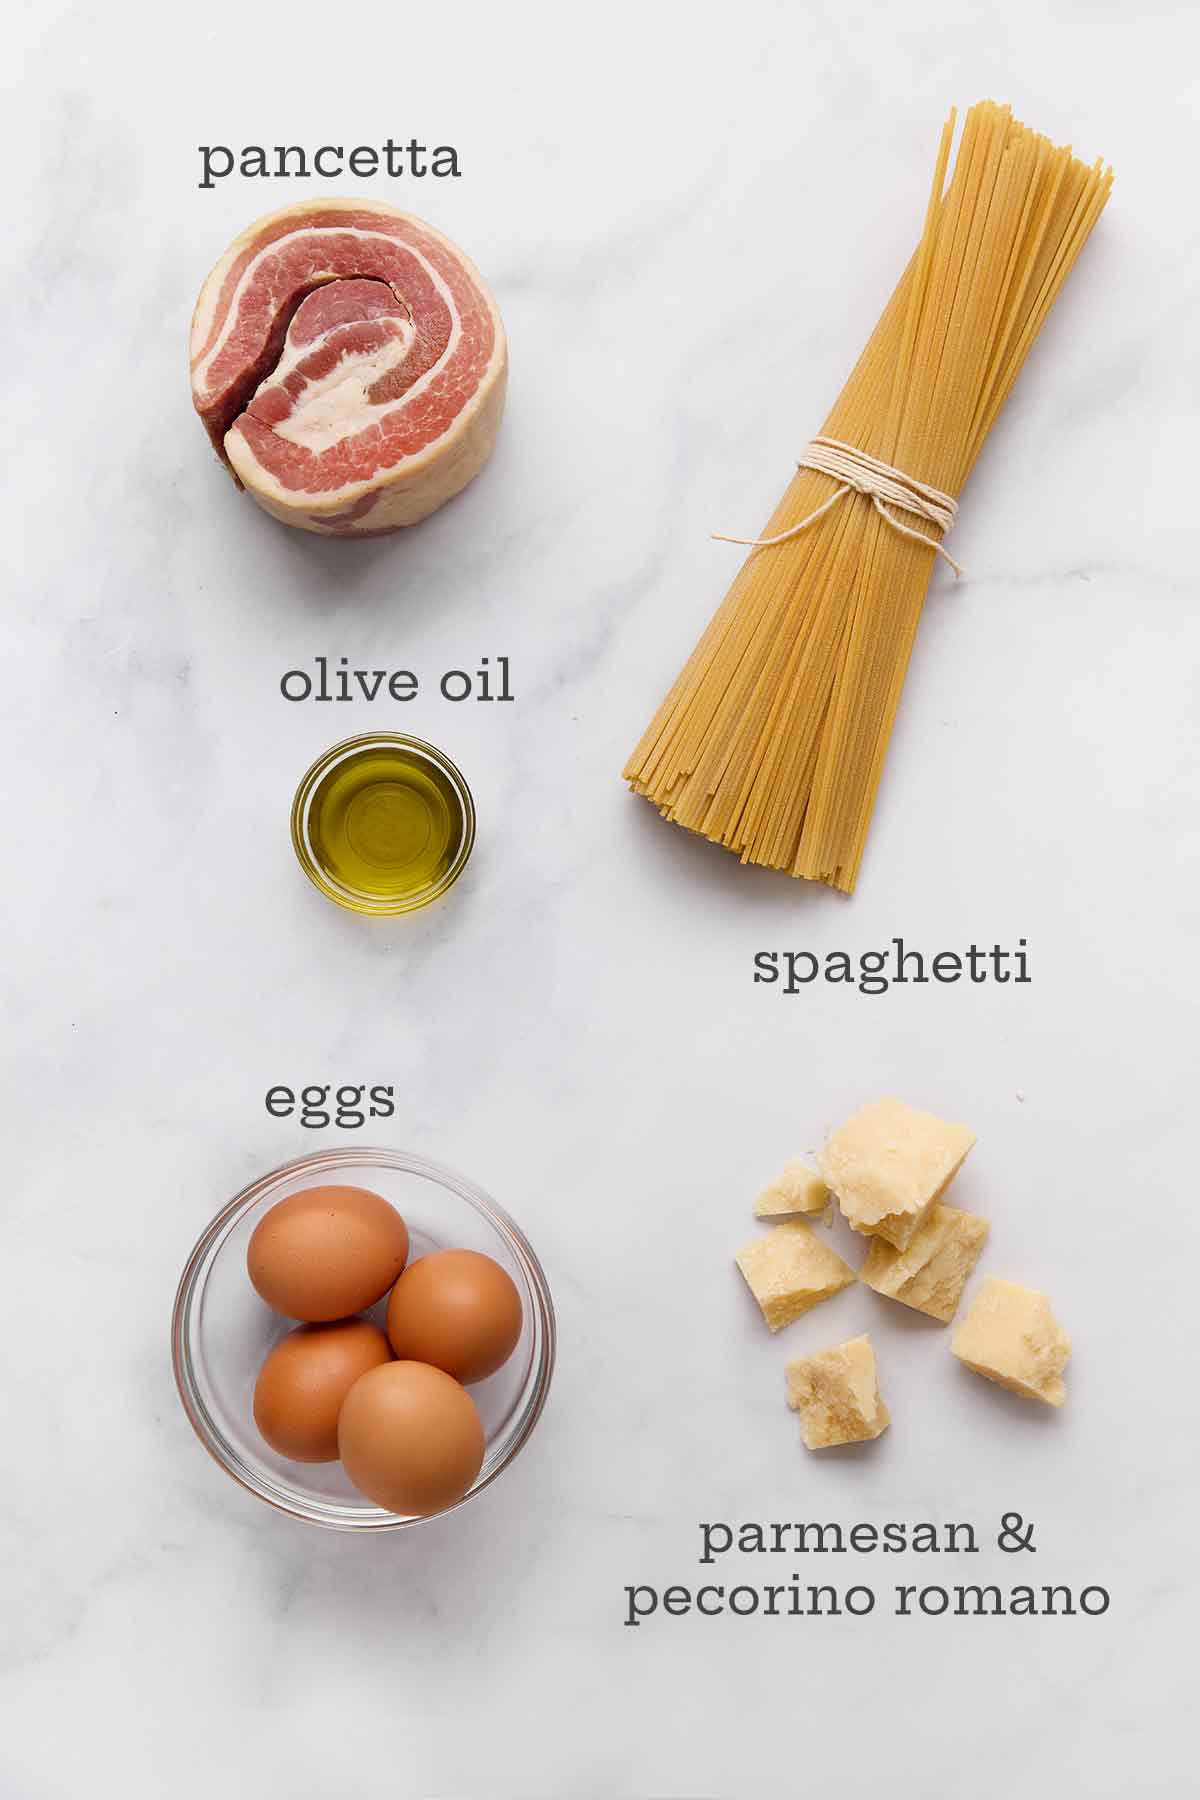 Ingredients for spaghetti carbonara--spaghetti, pancetta, olive oil, eggs, and Parmesan cheese.